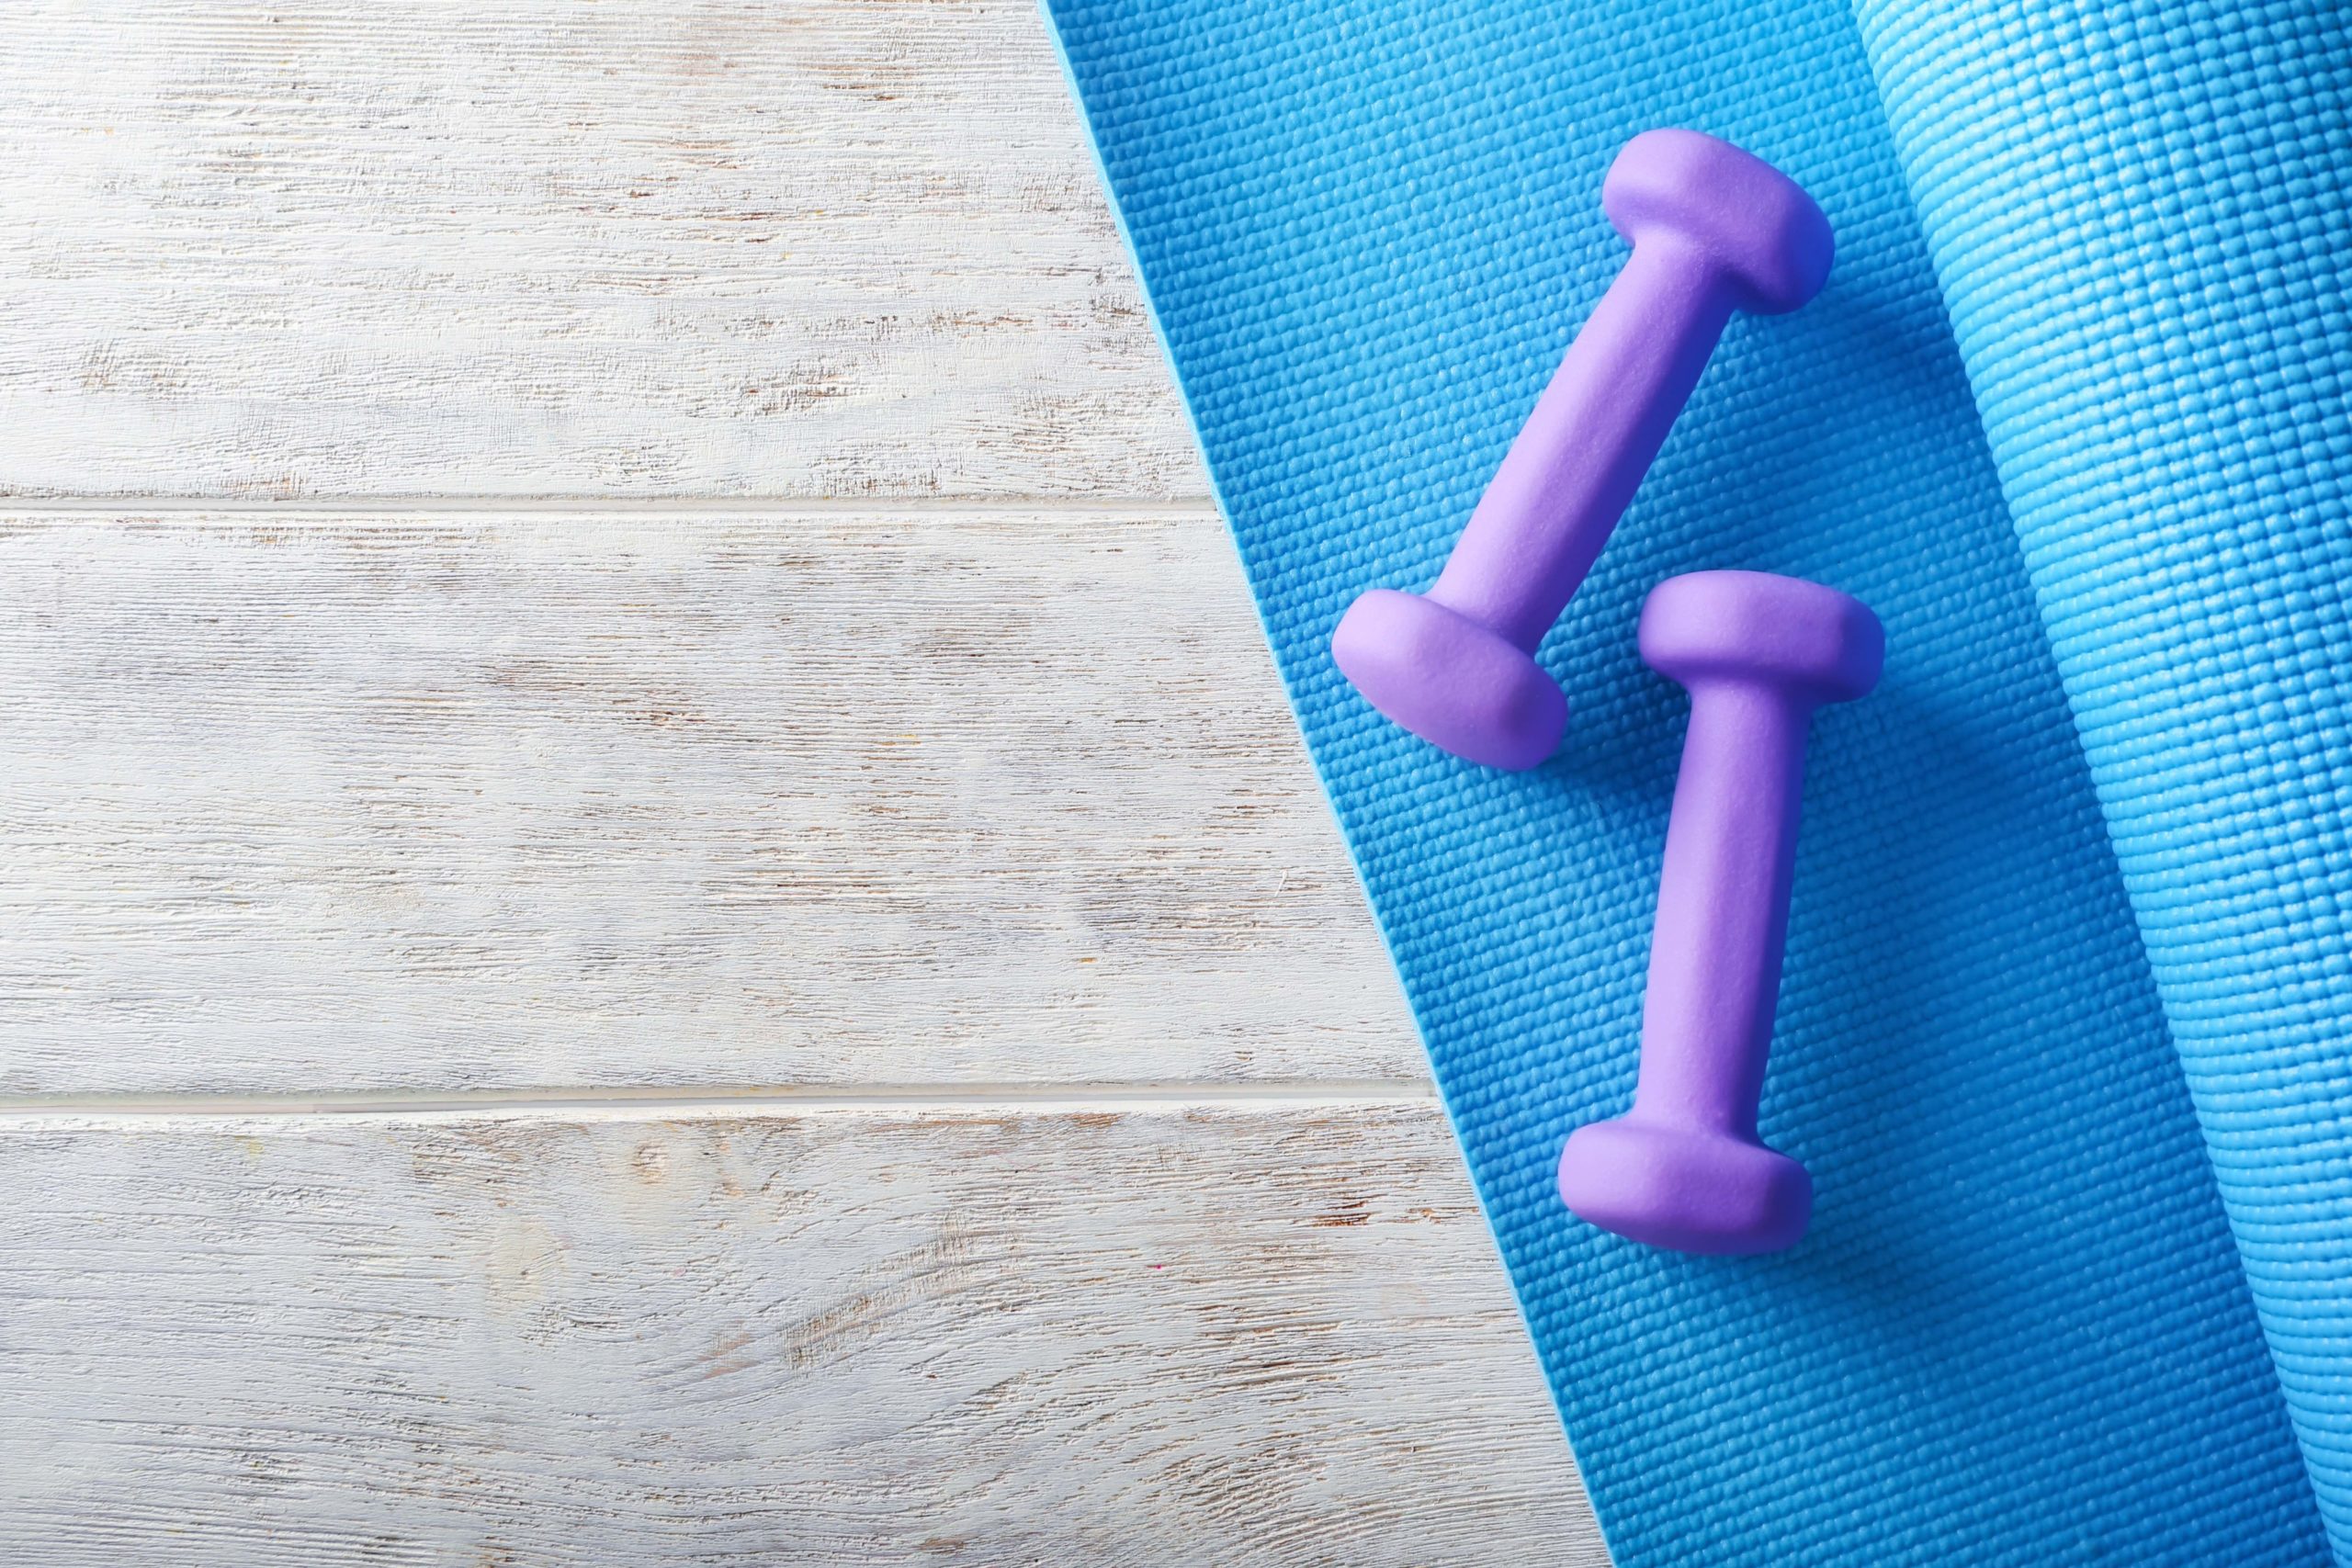 A pair of purple dumbbell weights on a blue exercise mat